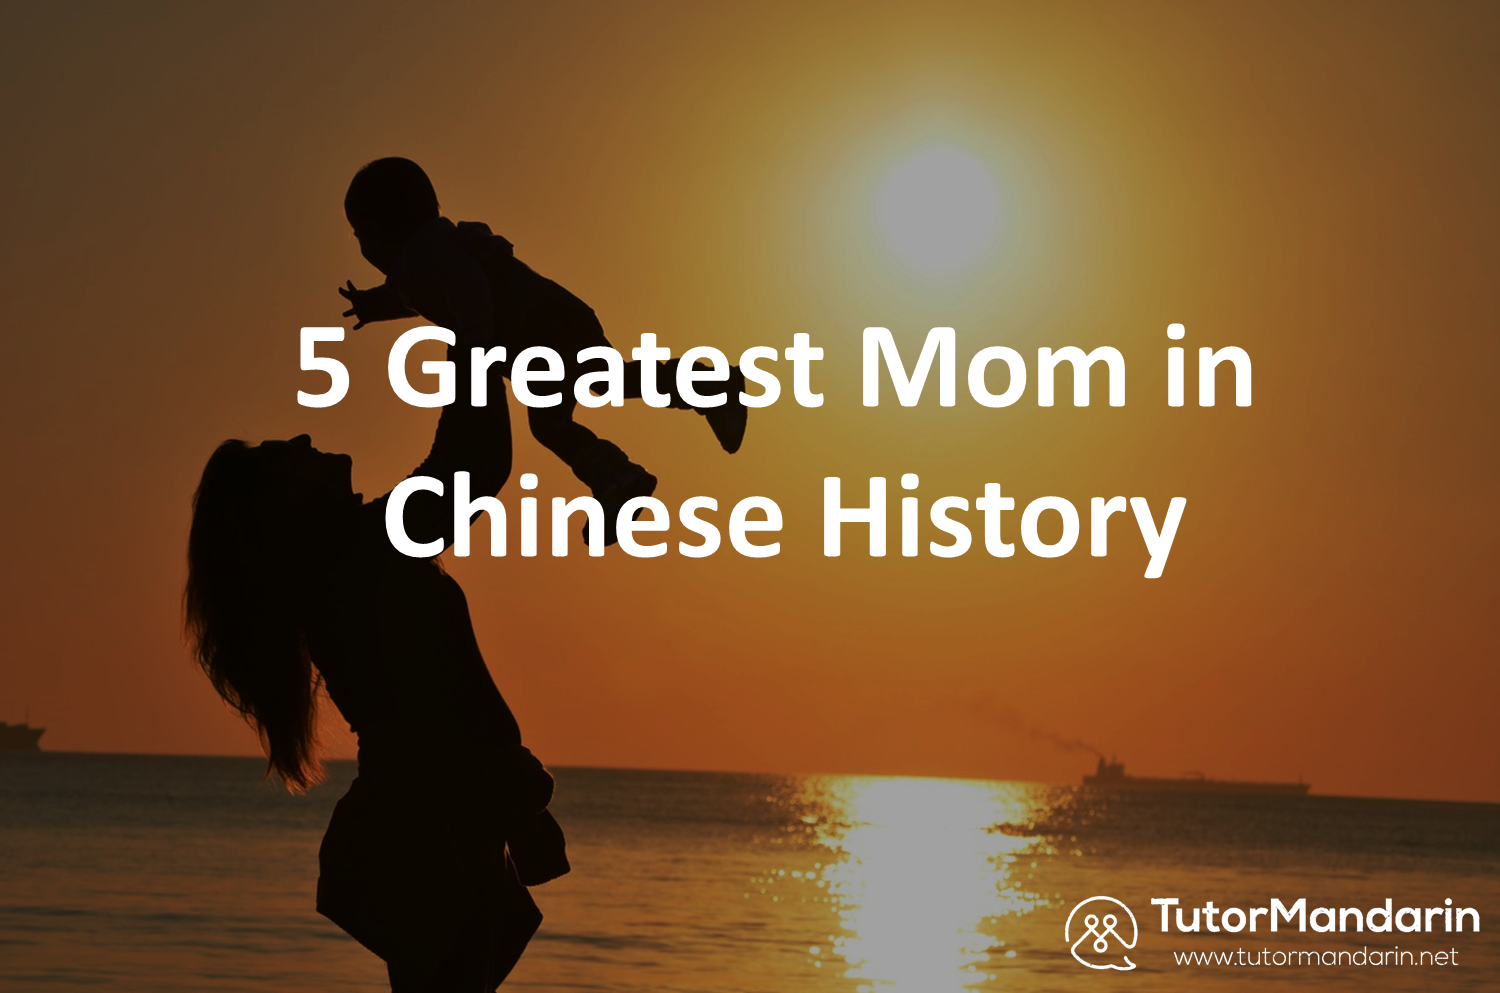 5 greatest mom in Chinese history 1-on-1 chinese lesson at tutormandarin